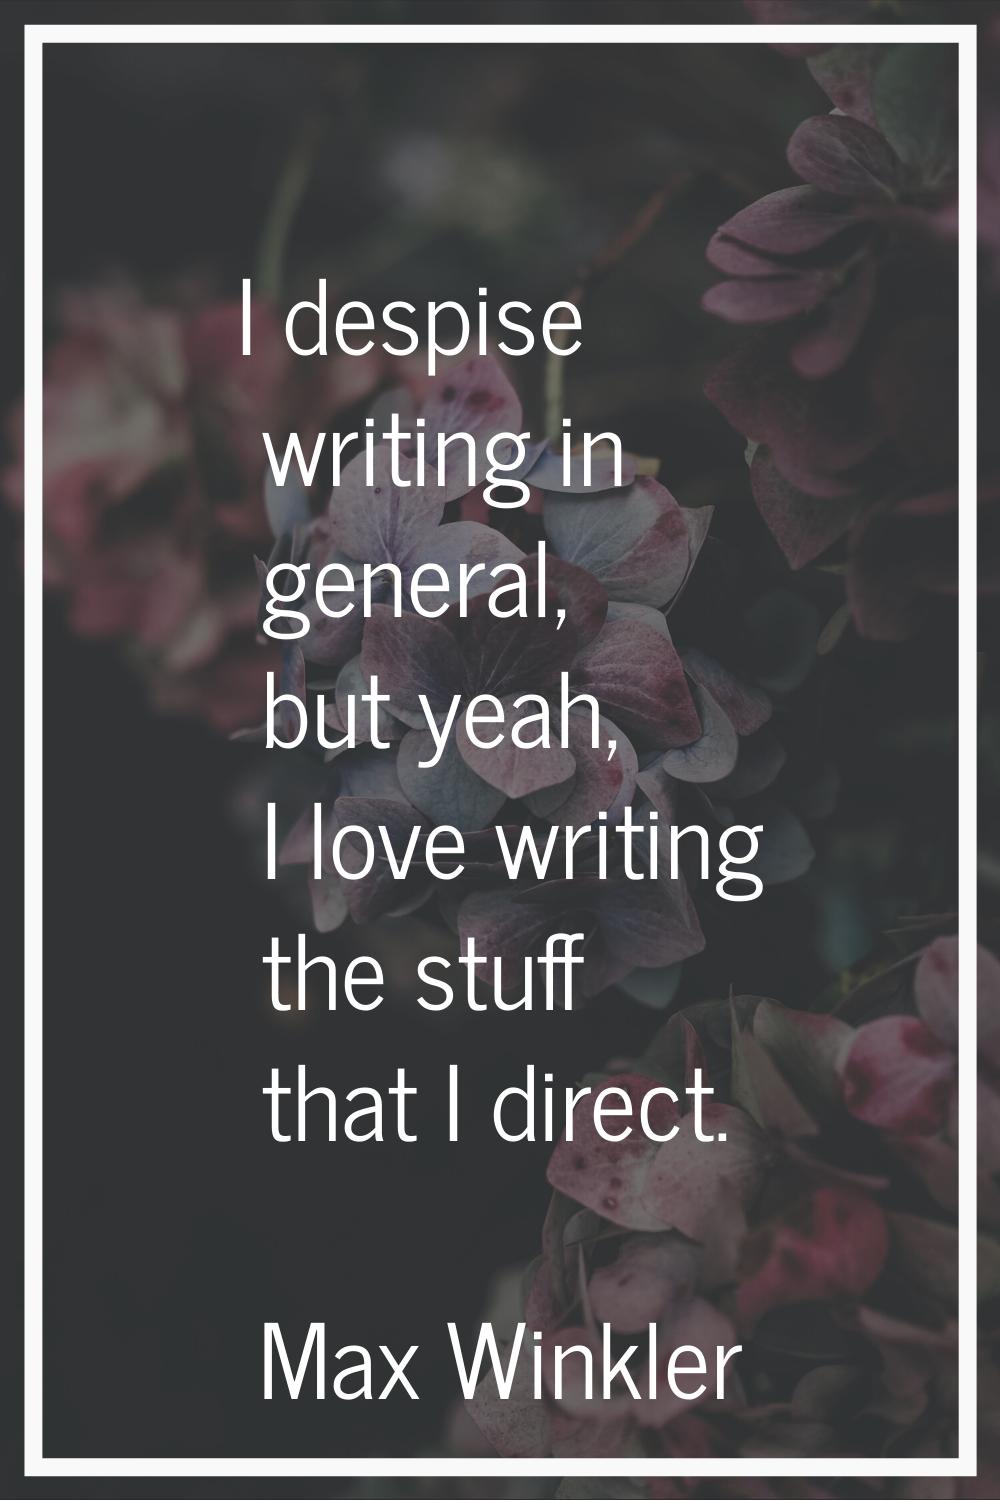 I despise writing in general, but yeah, I love writing the stuff that I direct.